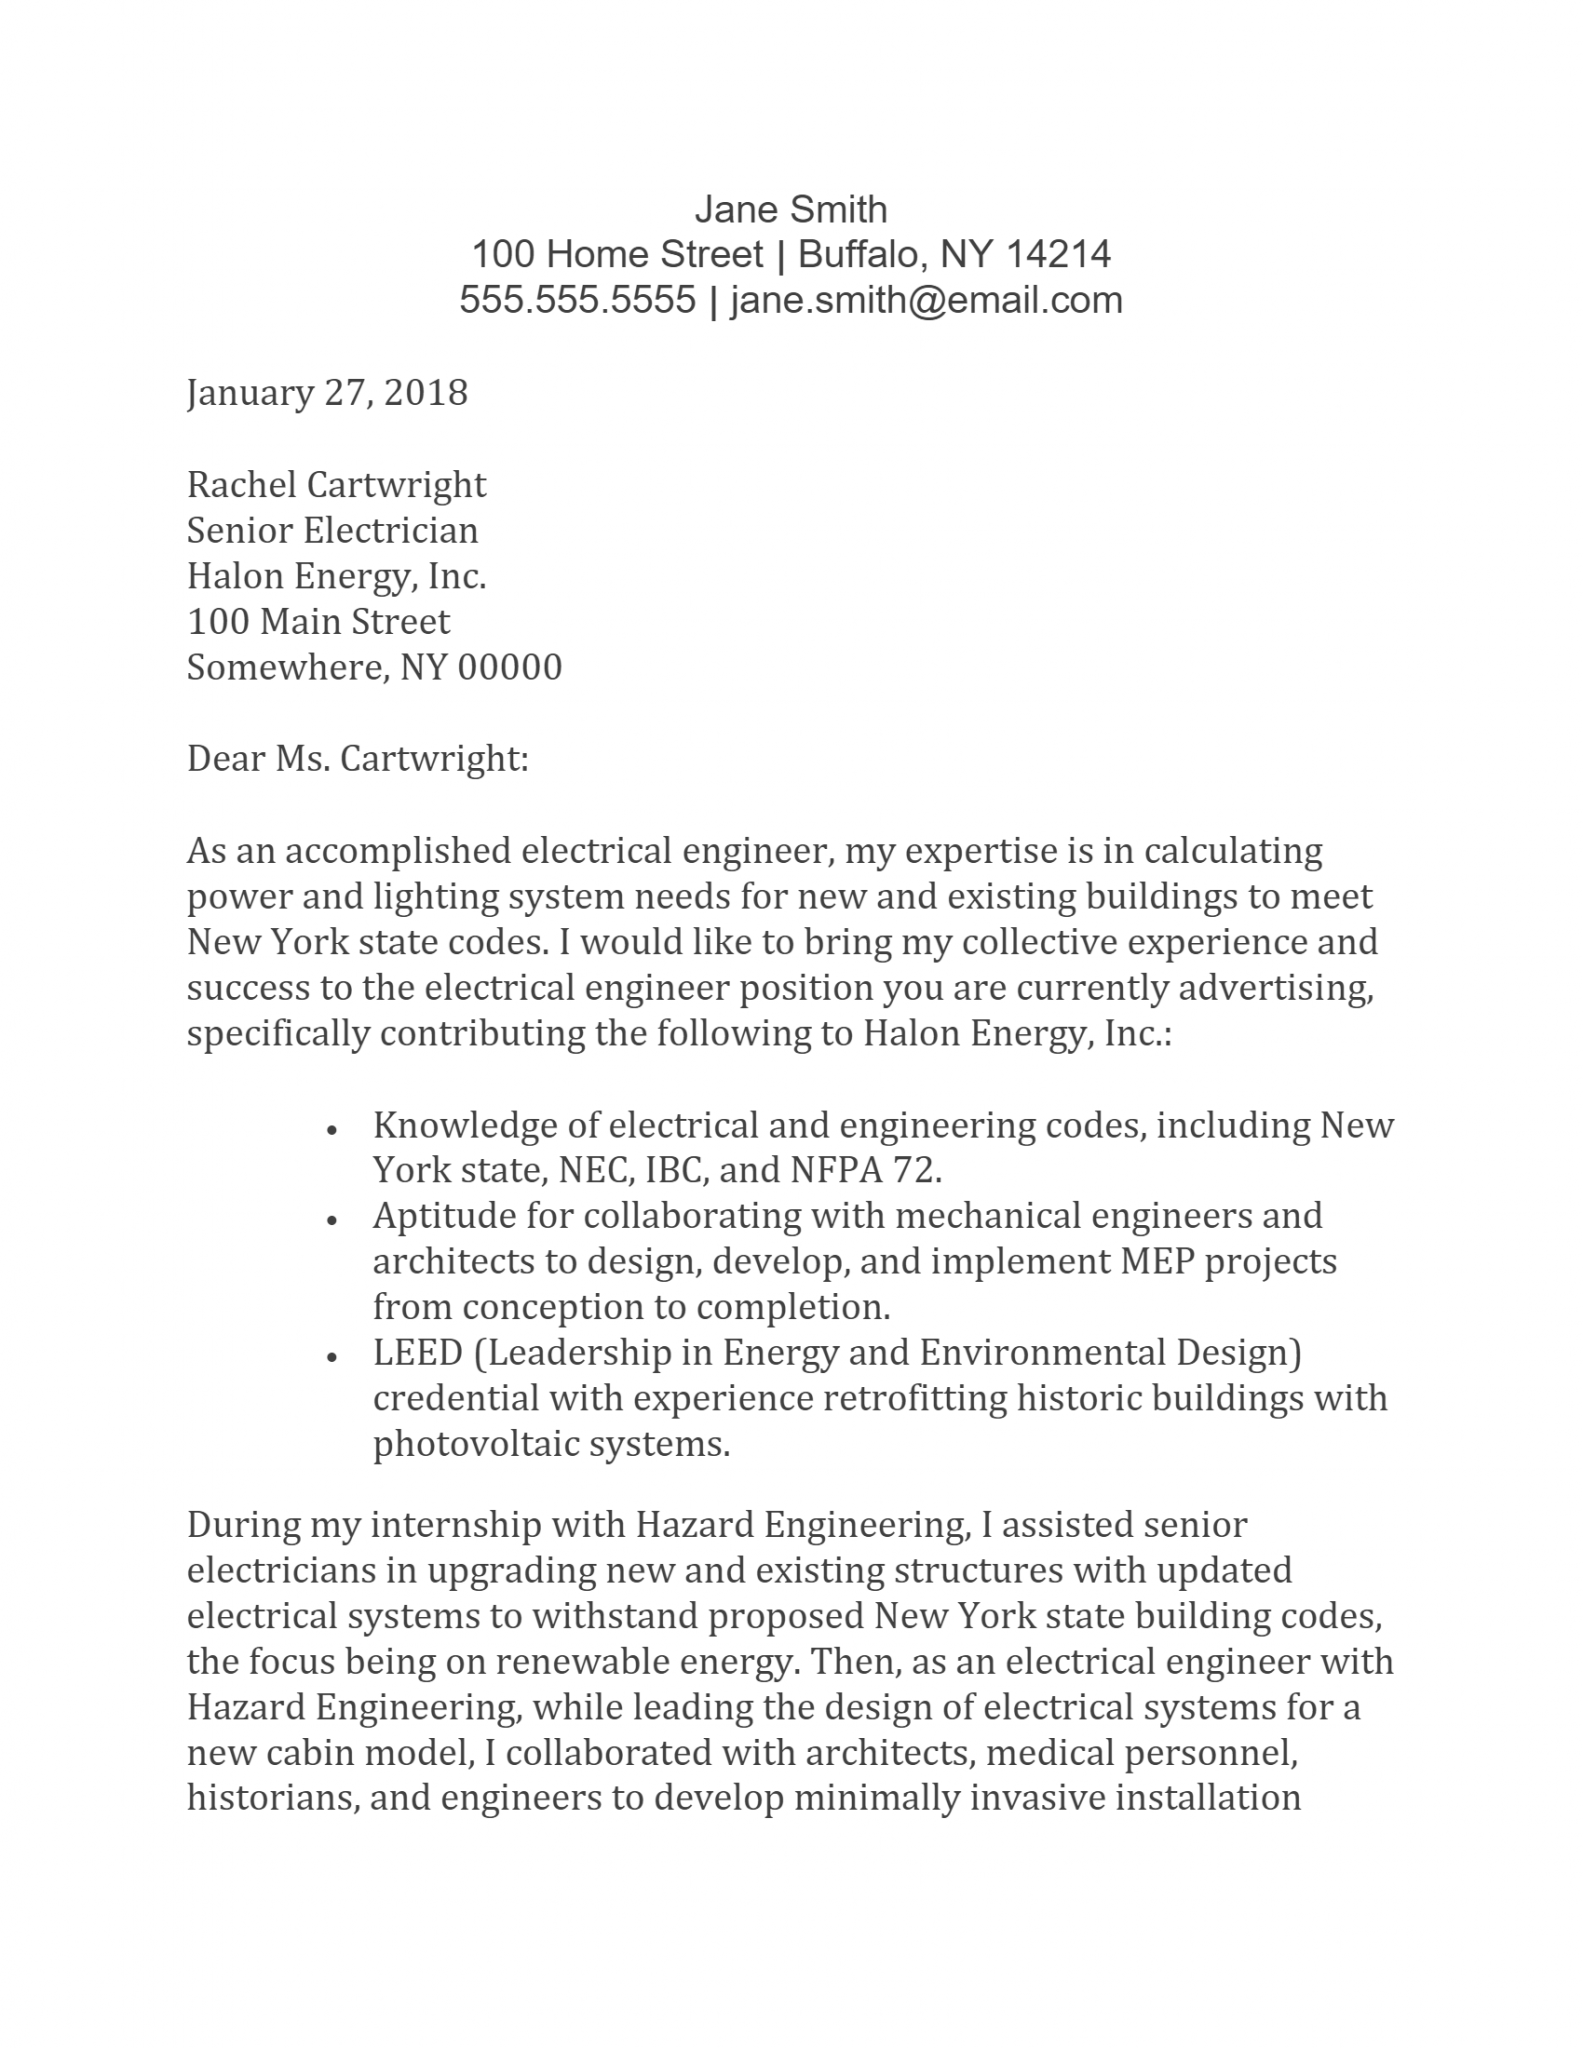 resume cover letter for electrical engineer